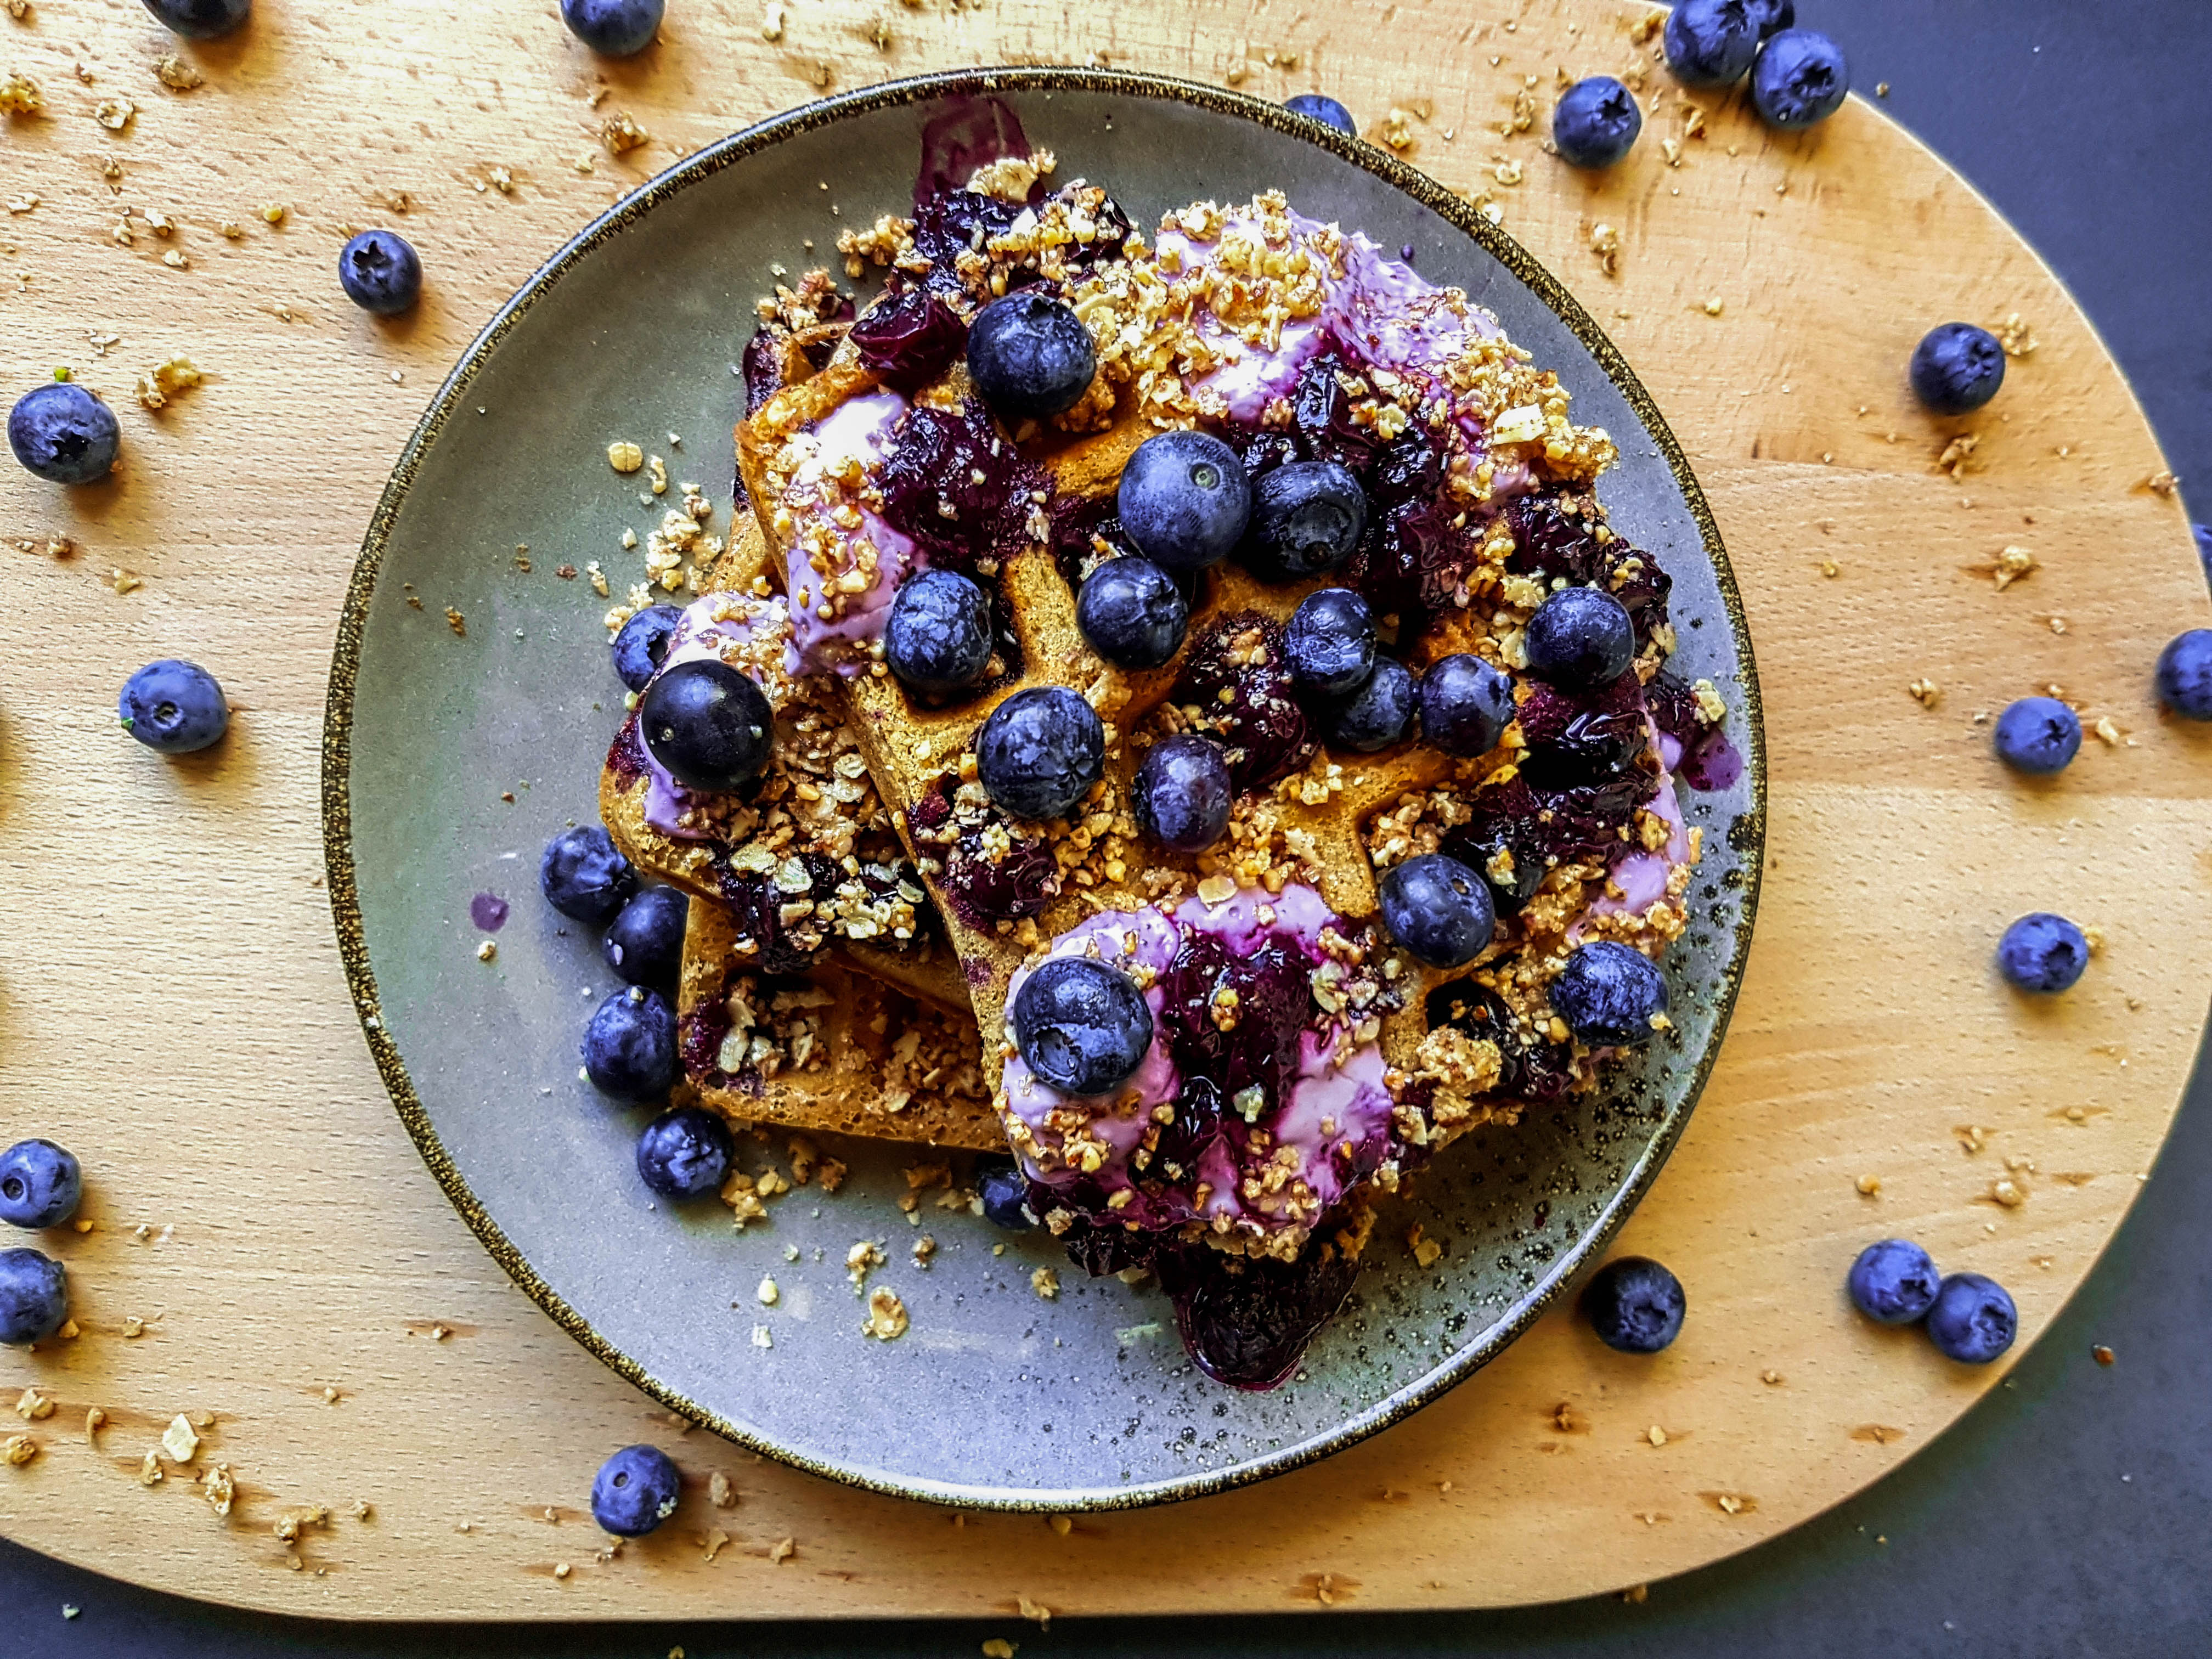 blueberry cream cheese waflles with a crumble topping